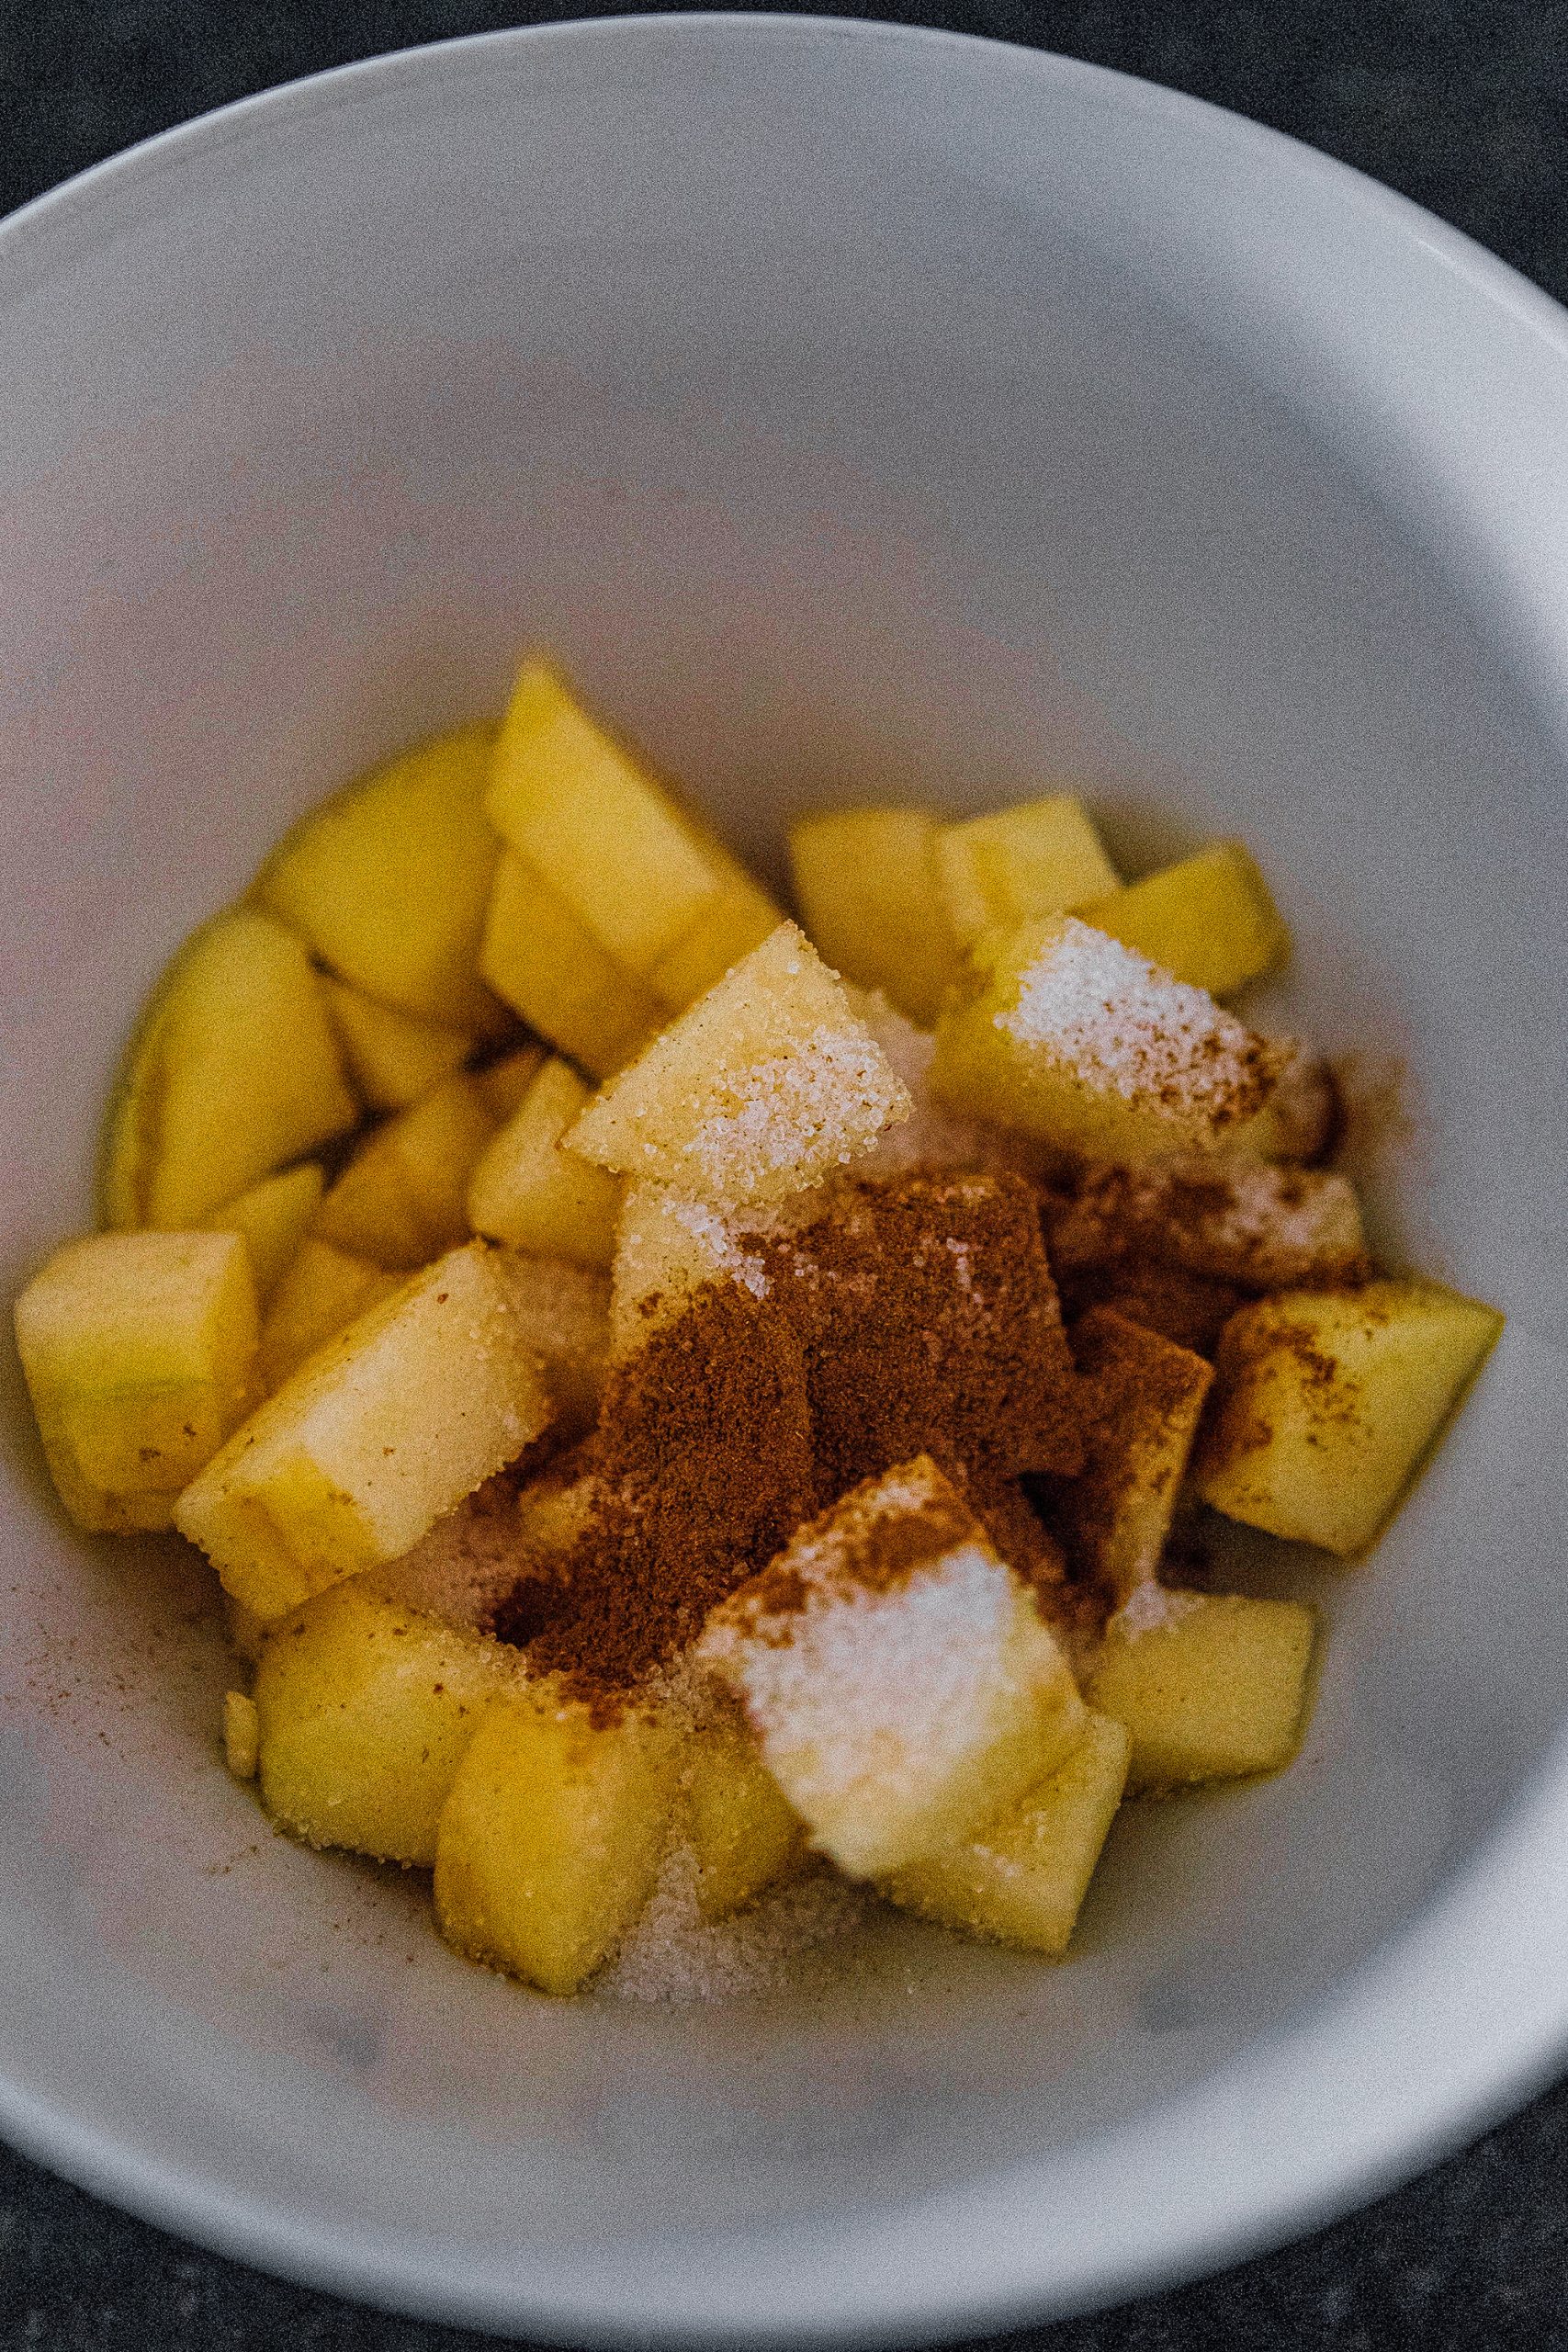 In a medium bowl, toss together diced apple, sugar, cinnamon and lemon juice together. Allow to sit for 10 minutes.